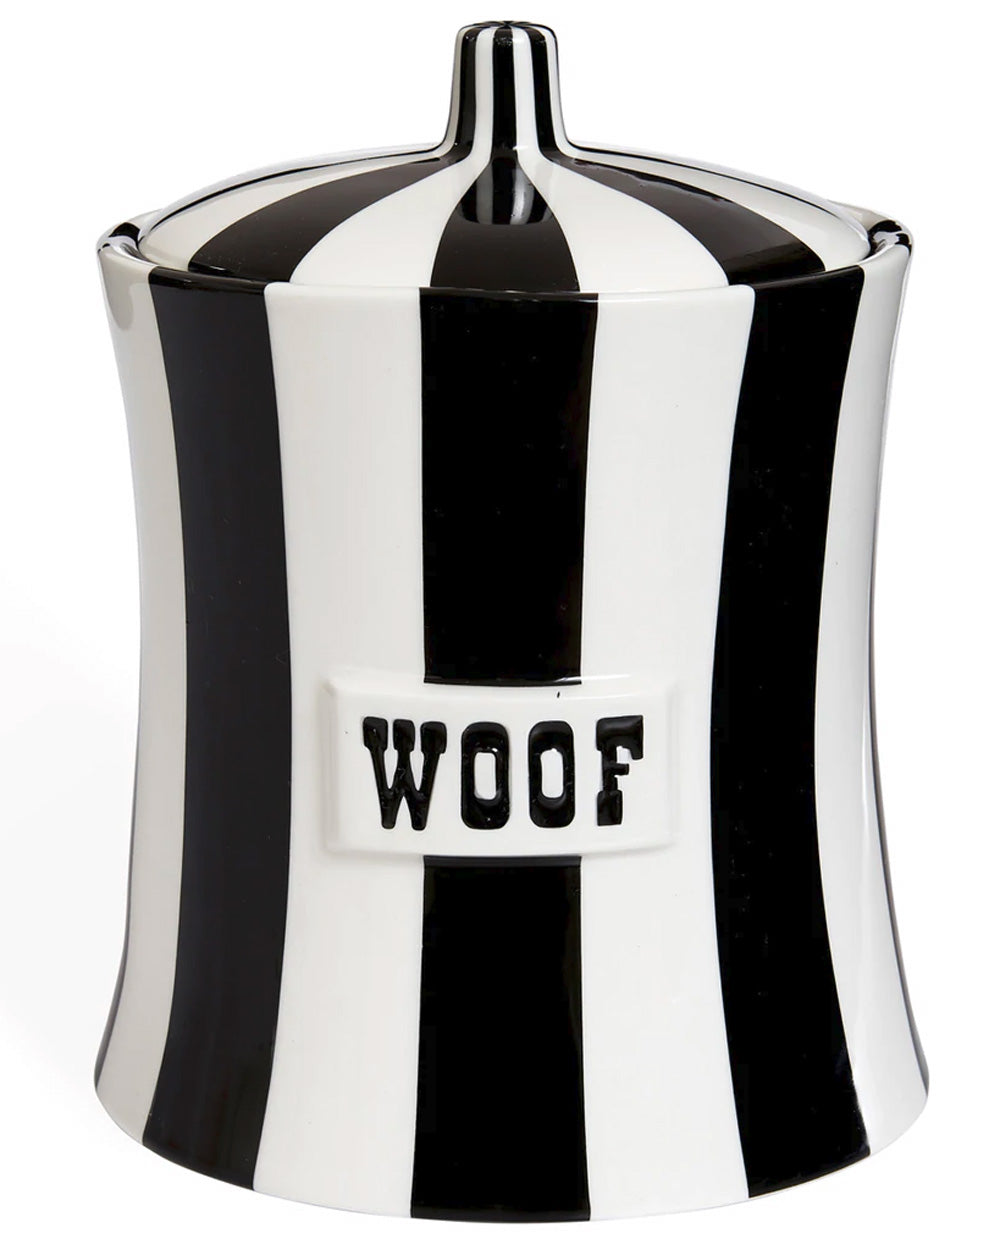 Woof Vice Canister